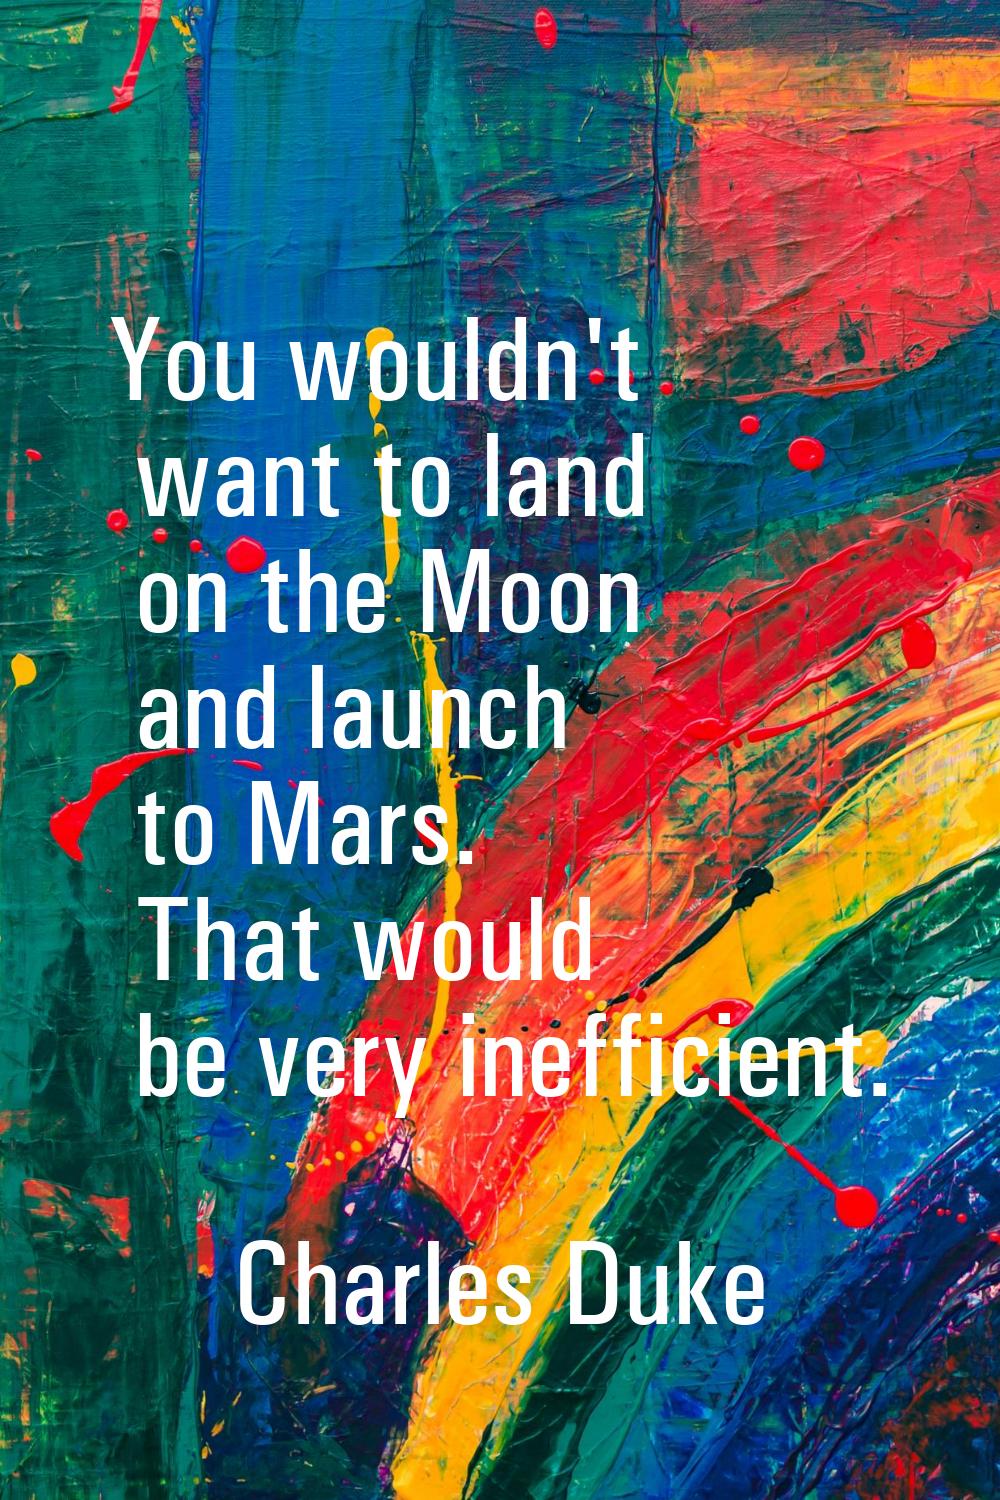 You wouldn't want to land on the Moon and launch to Mars. That would be very inefficient.